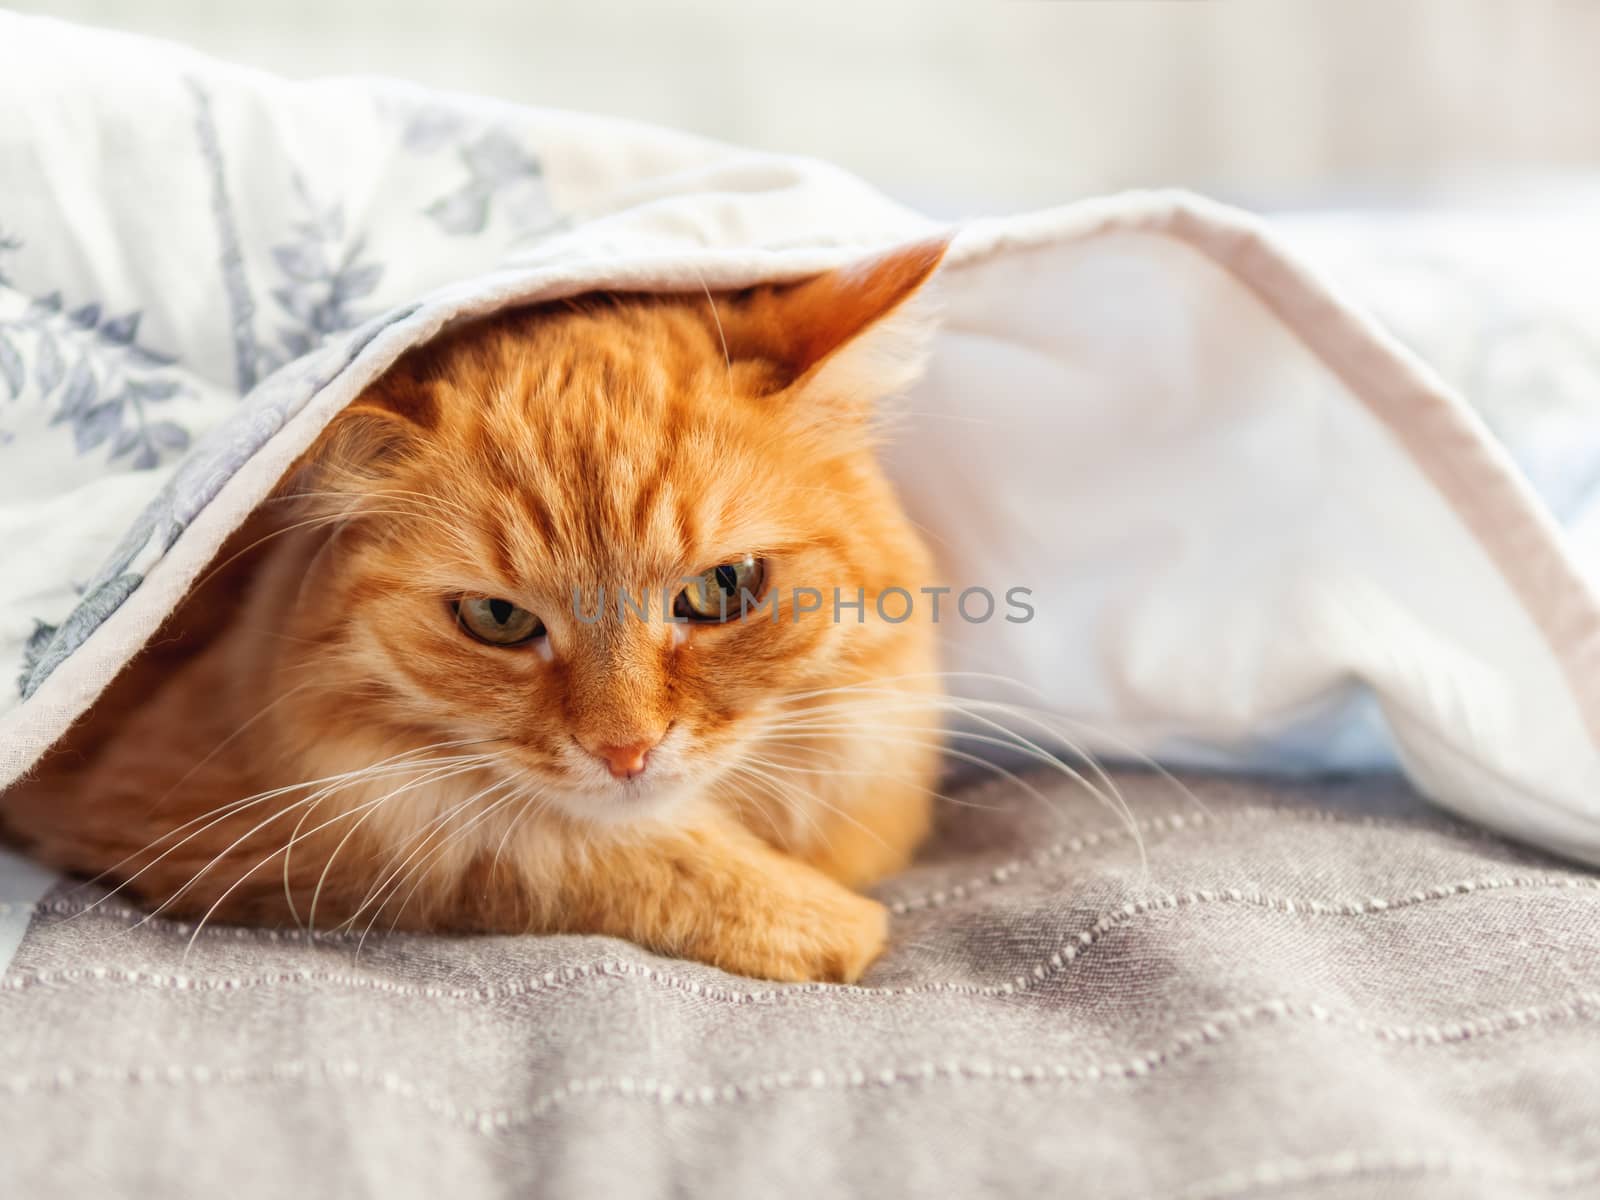 Cute ginger cat is hiding under blanket. Fluffy pet with disappointed face expression. Cozy home background.